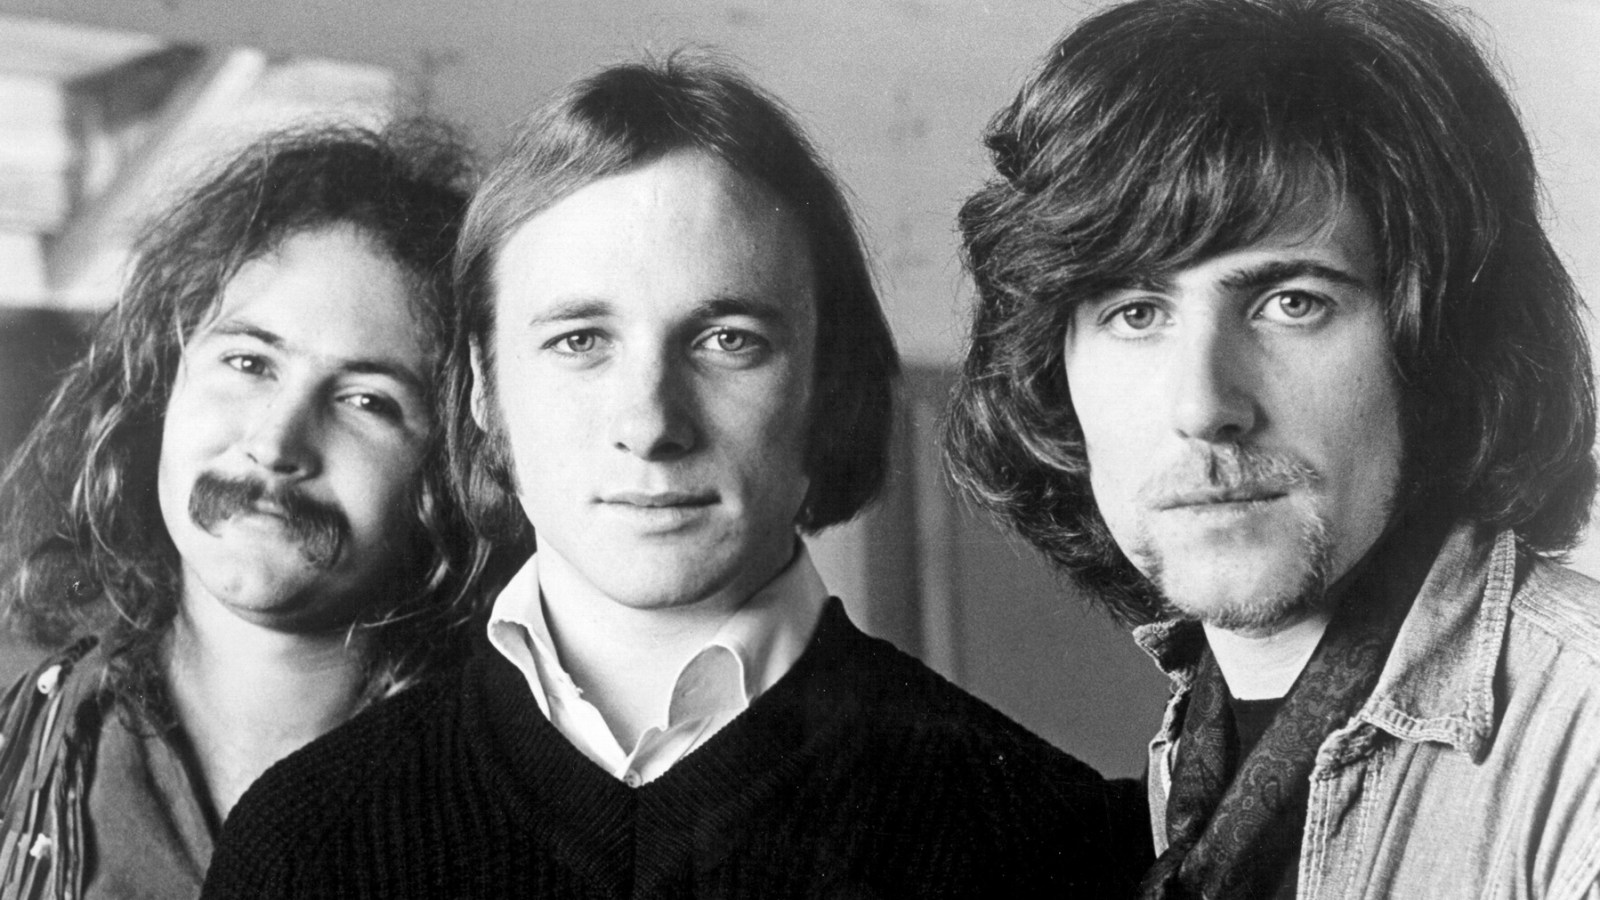 A Crosby, Stills & Nash Tribute Show Is Set for New York This Spring